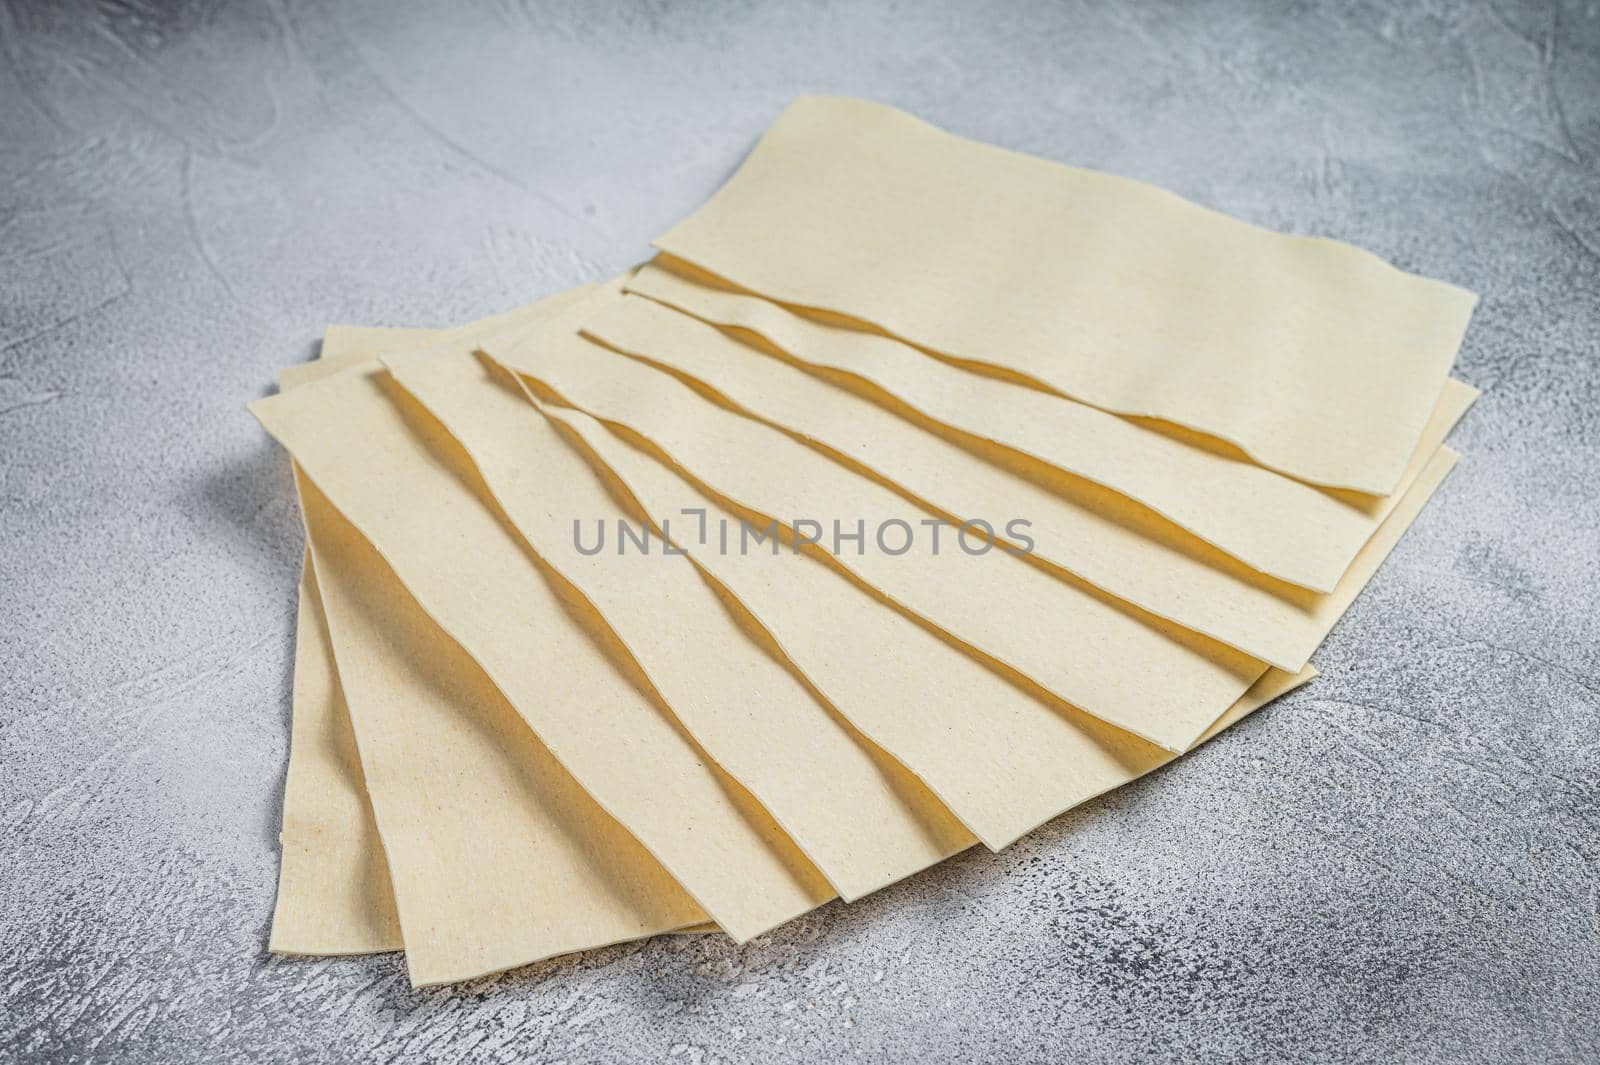 Raw lasagna sheets stack on a kitchen table. White background. Top view.